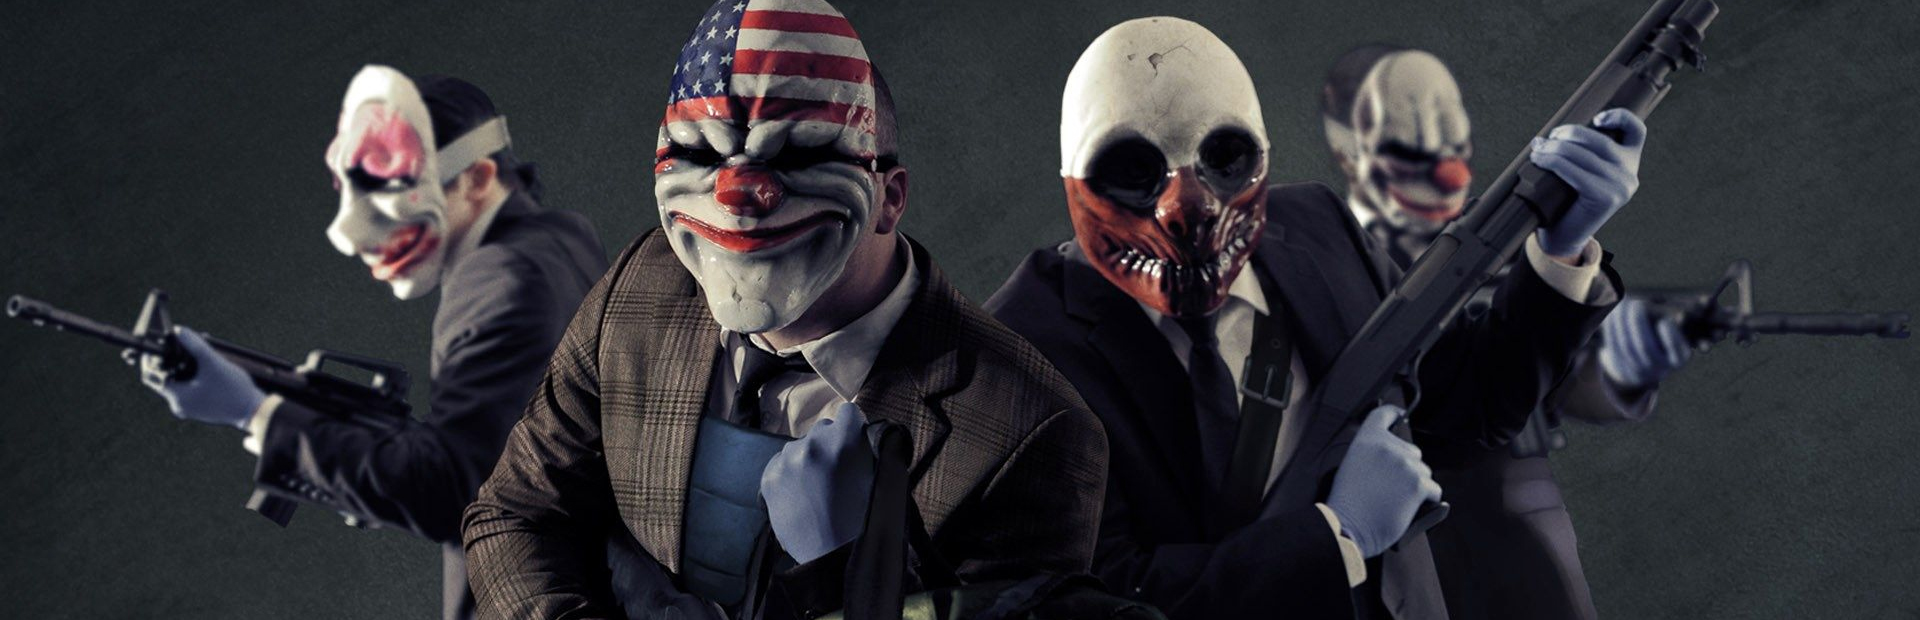 The Heist, payday 2 General триллер